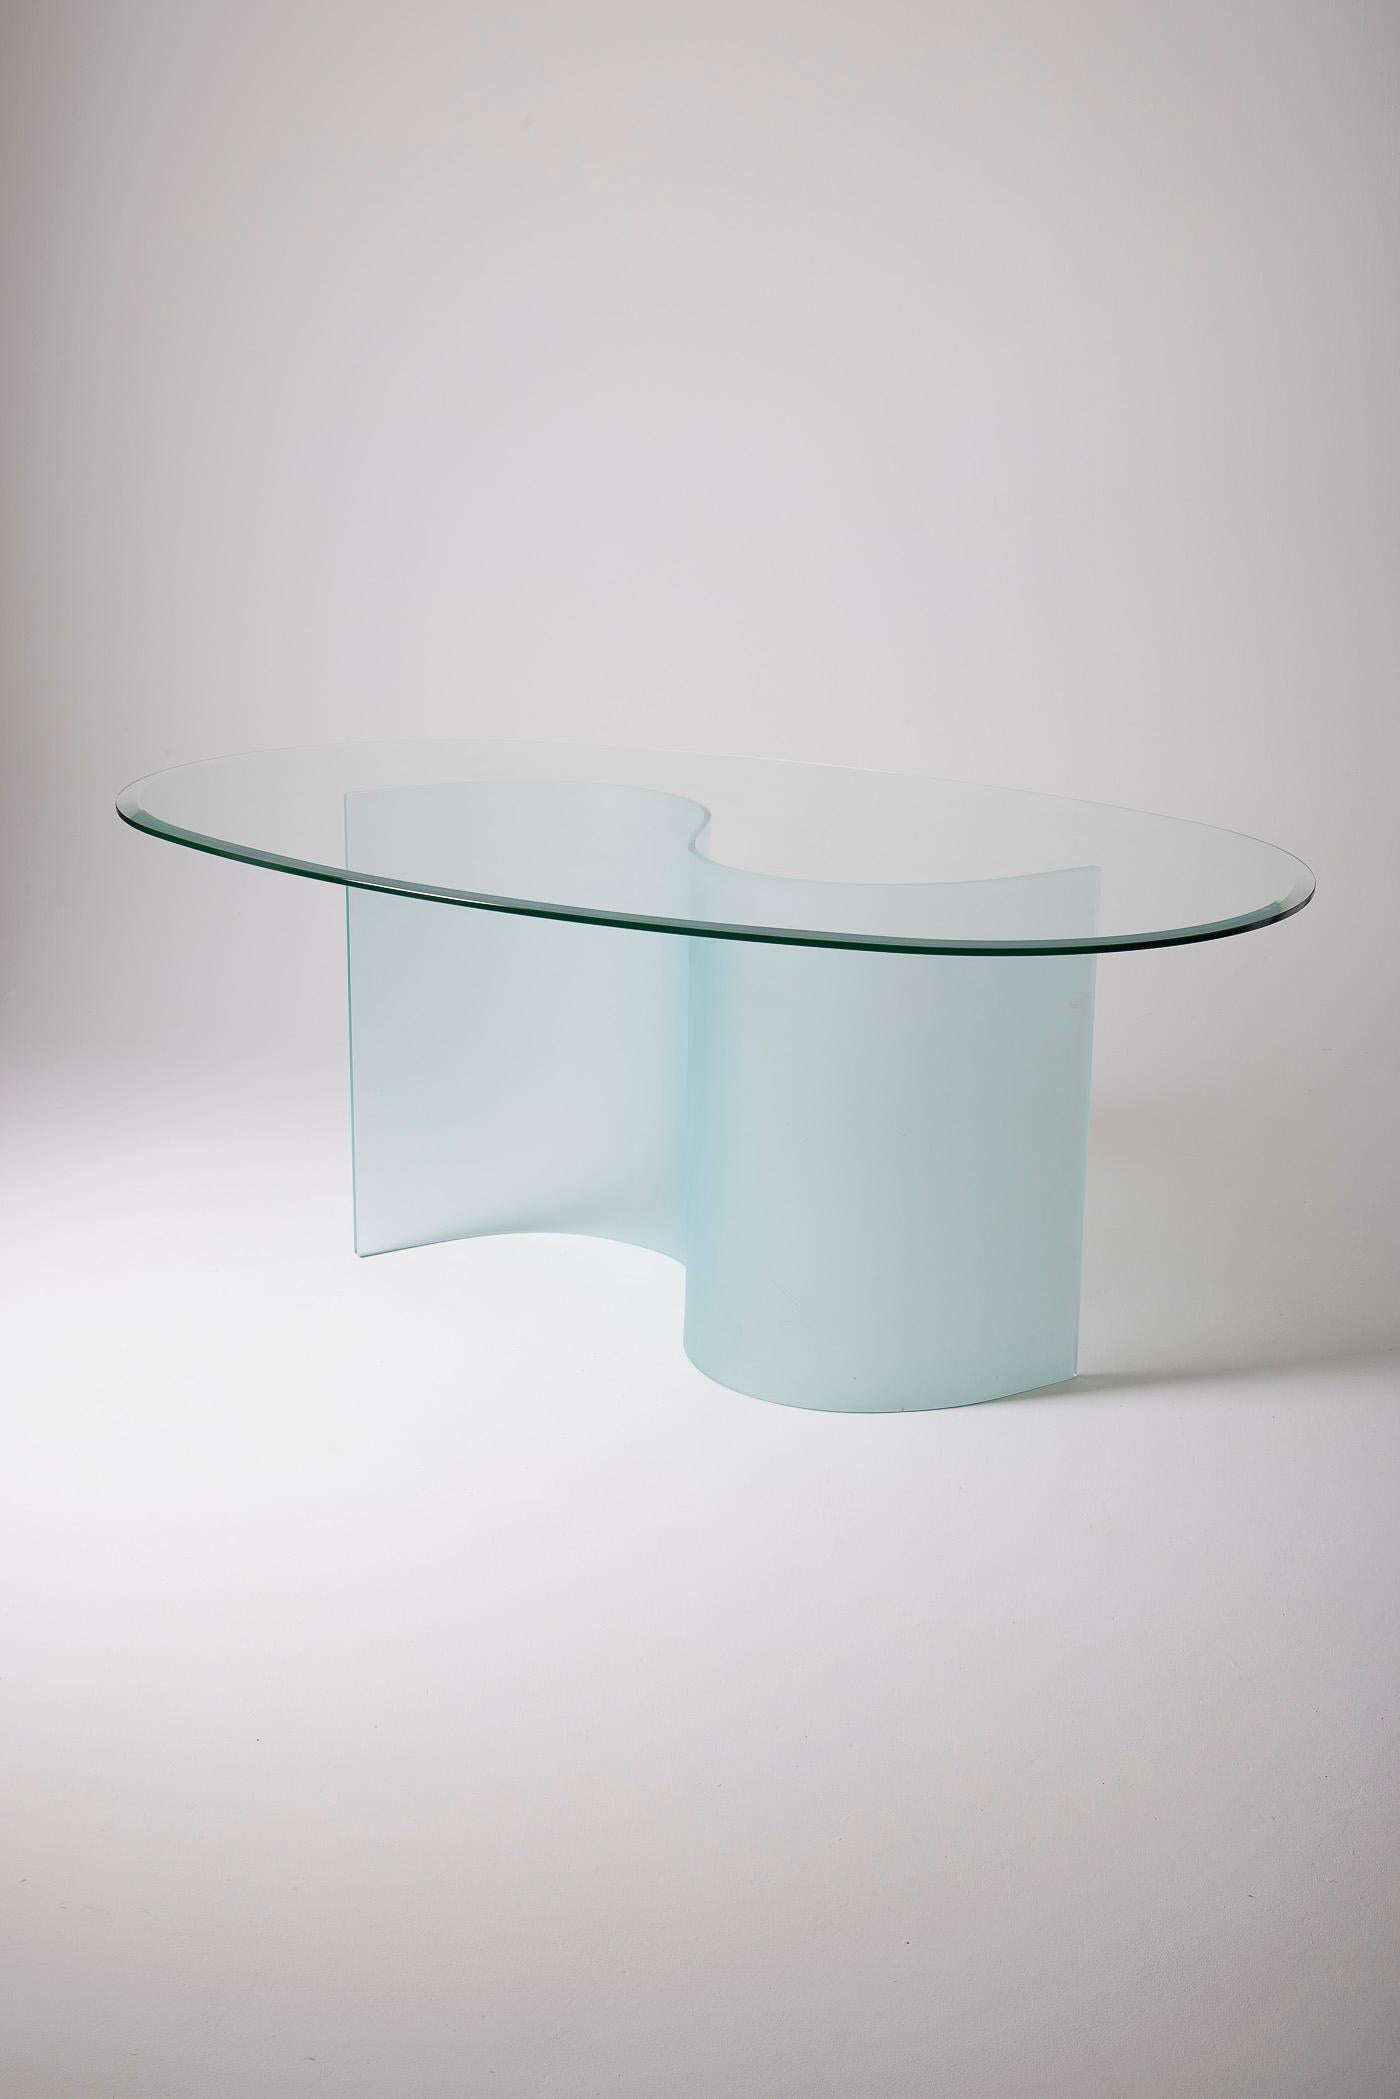 Space Age Glass dining table For Sale